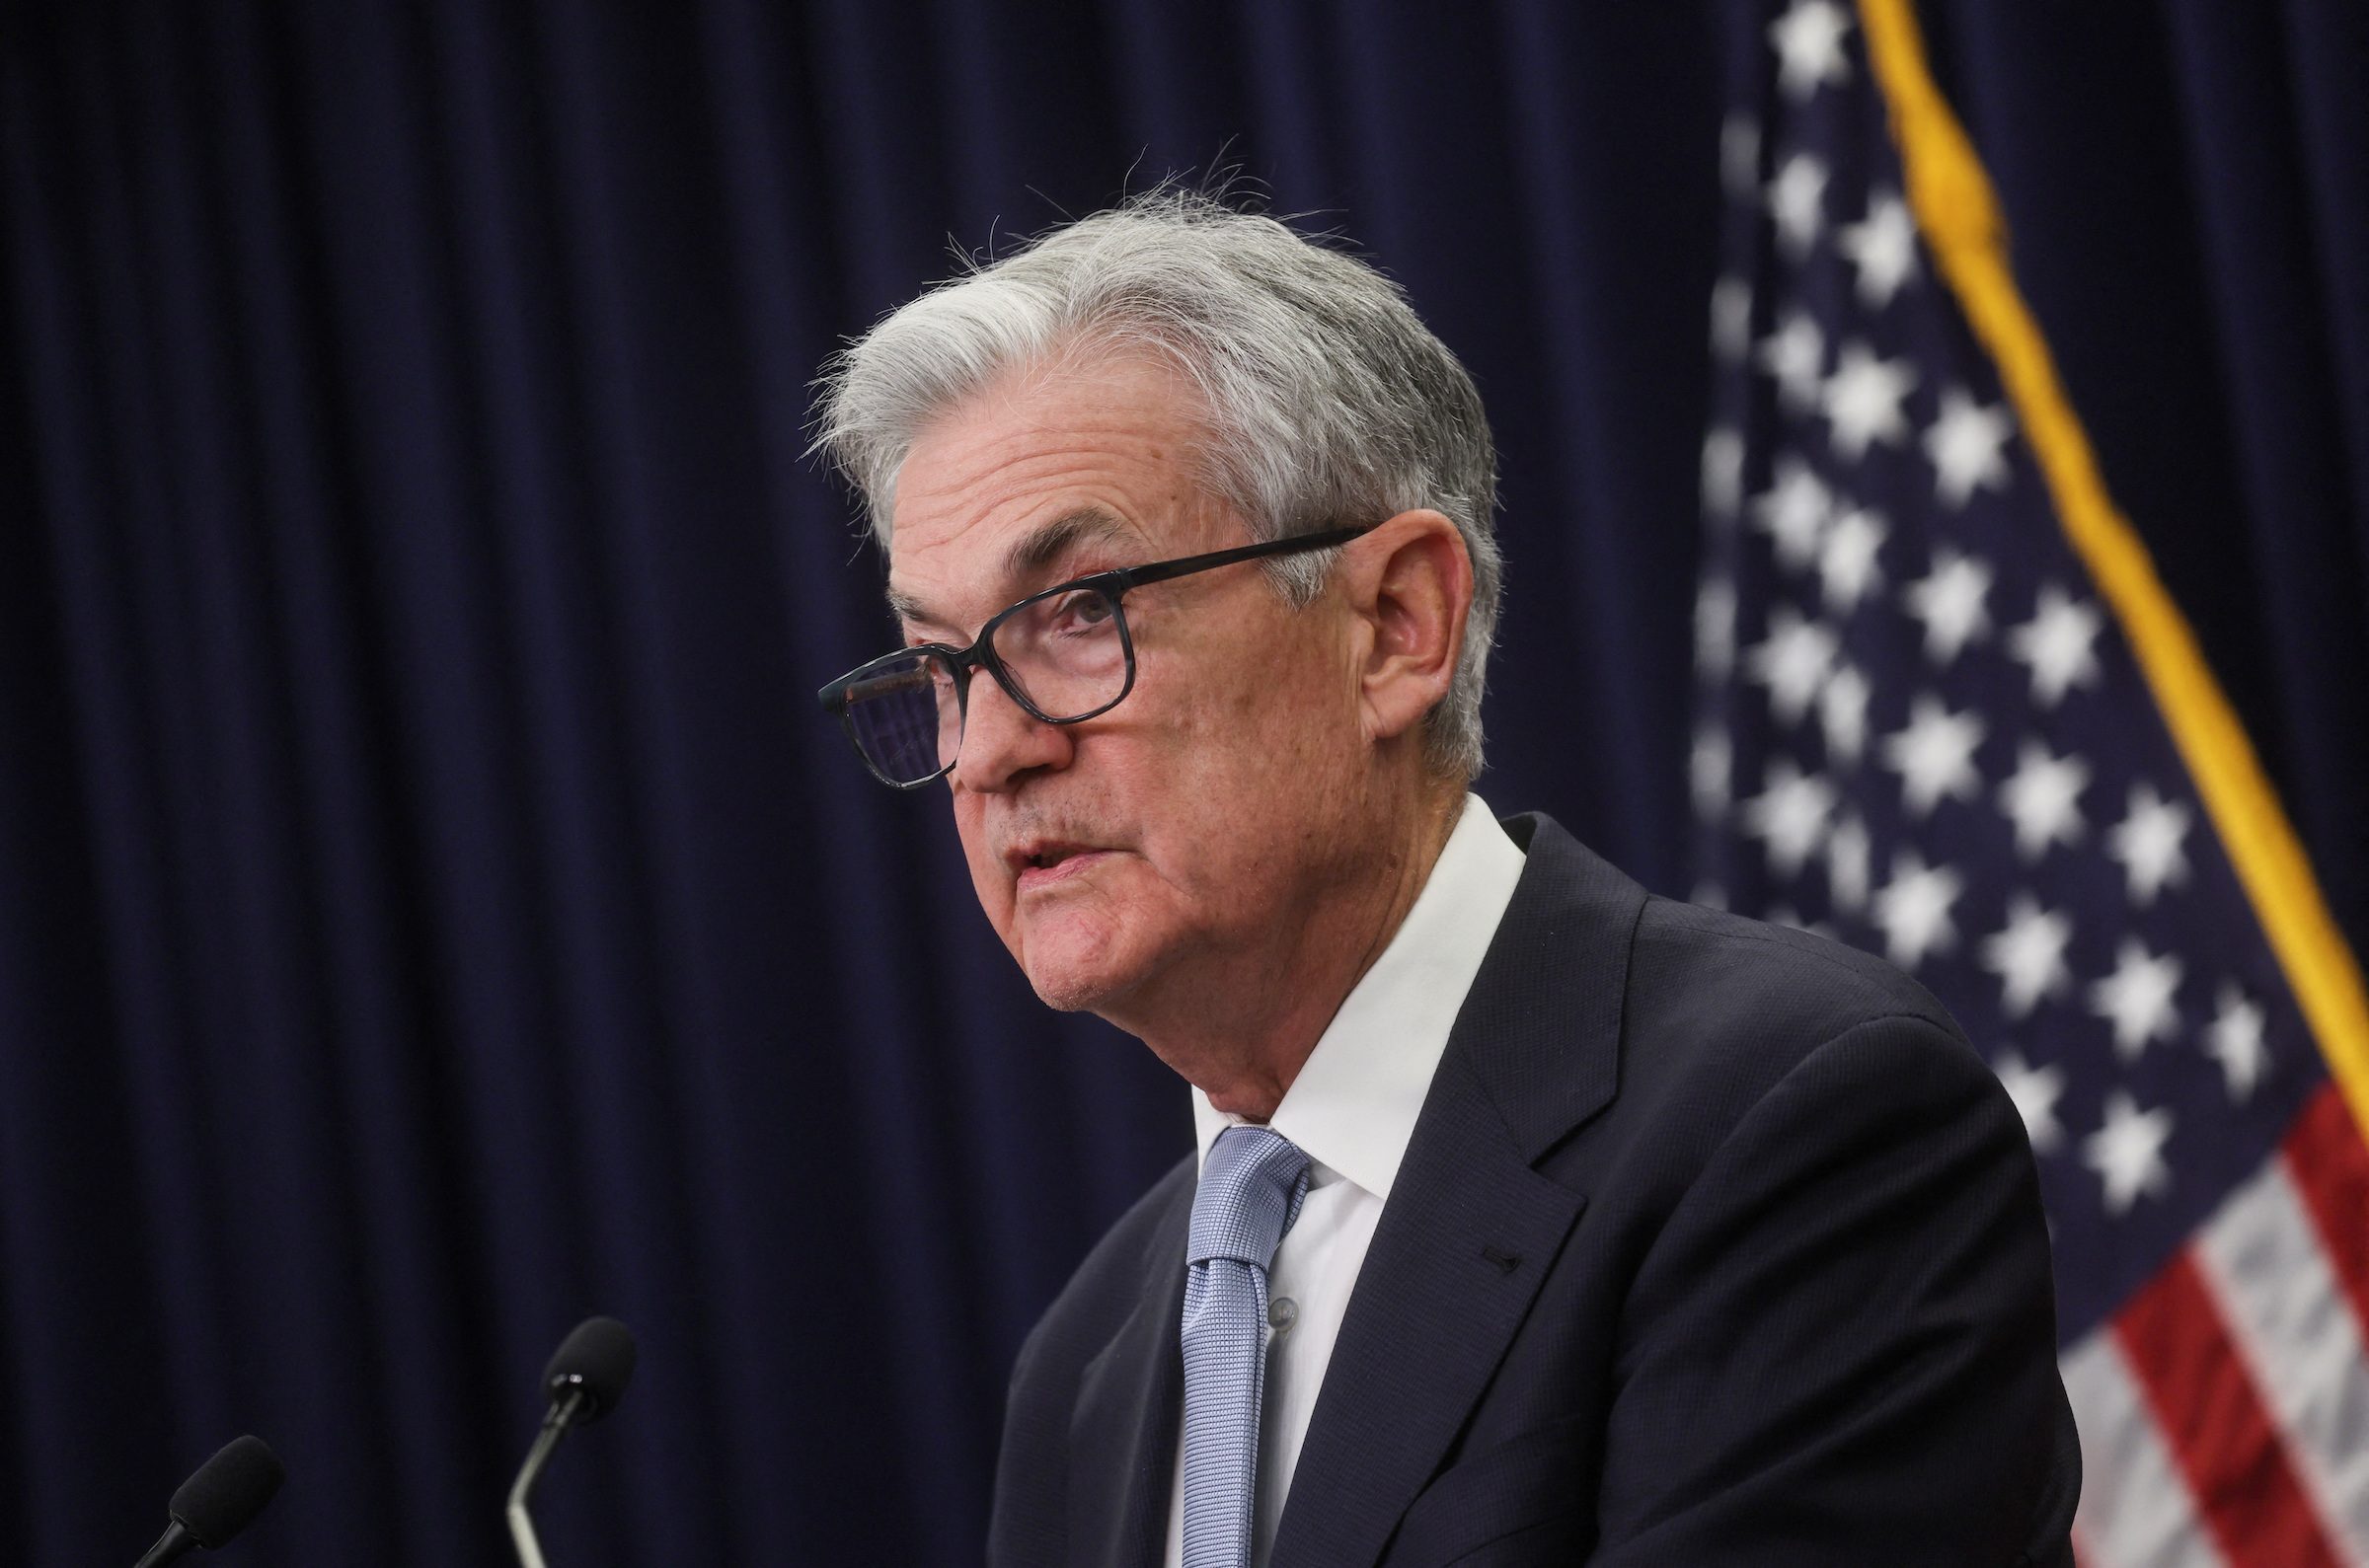 Several Fed officials considered rate pause in March, minutes show